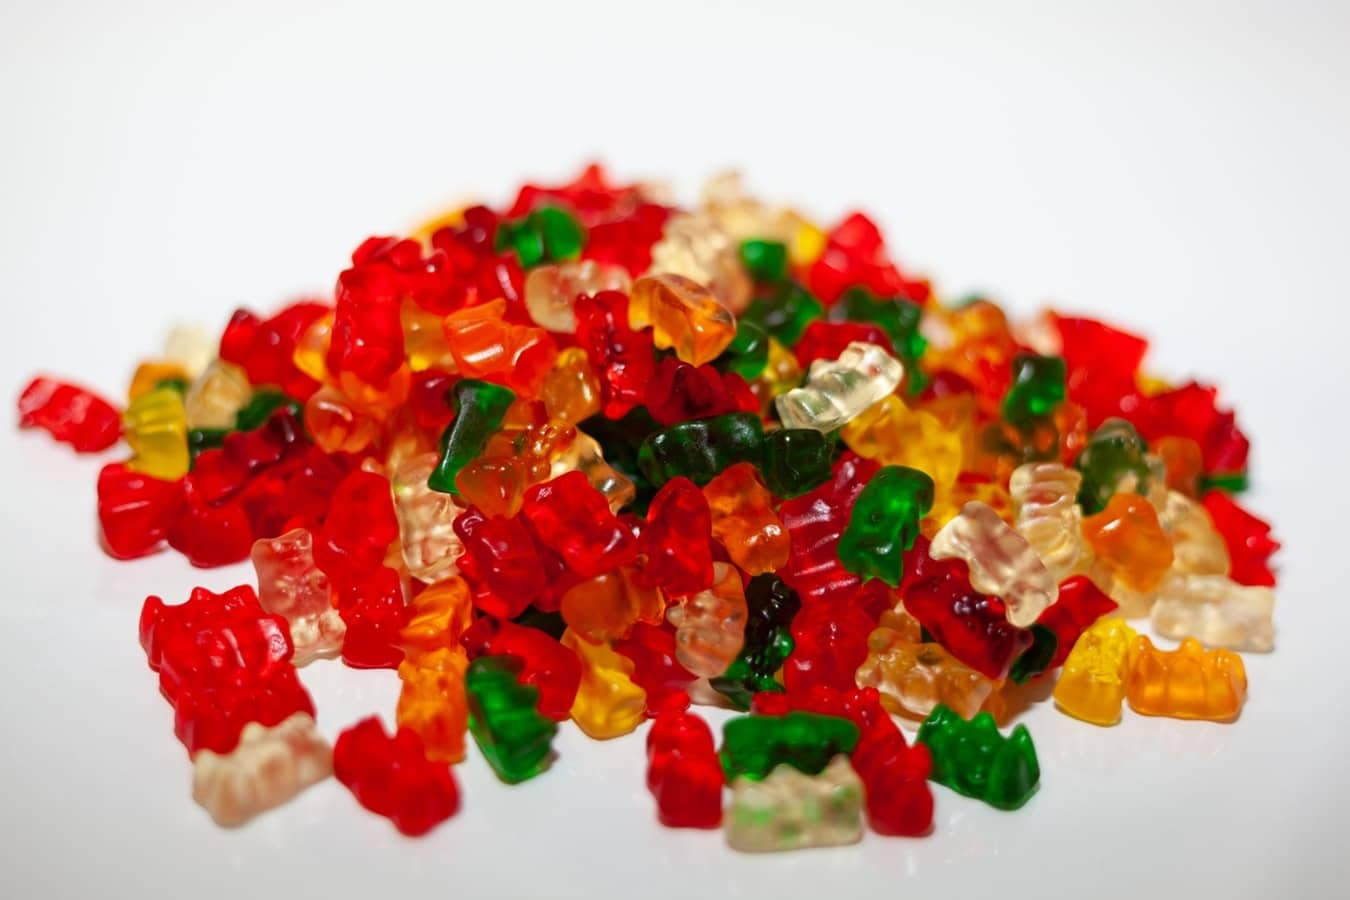 How to Choose the Right Delta 8 Gummies for You?